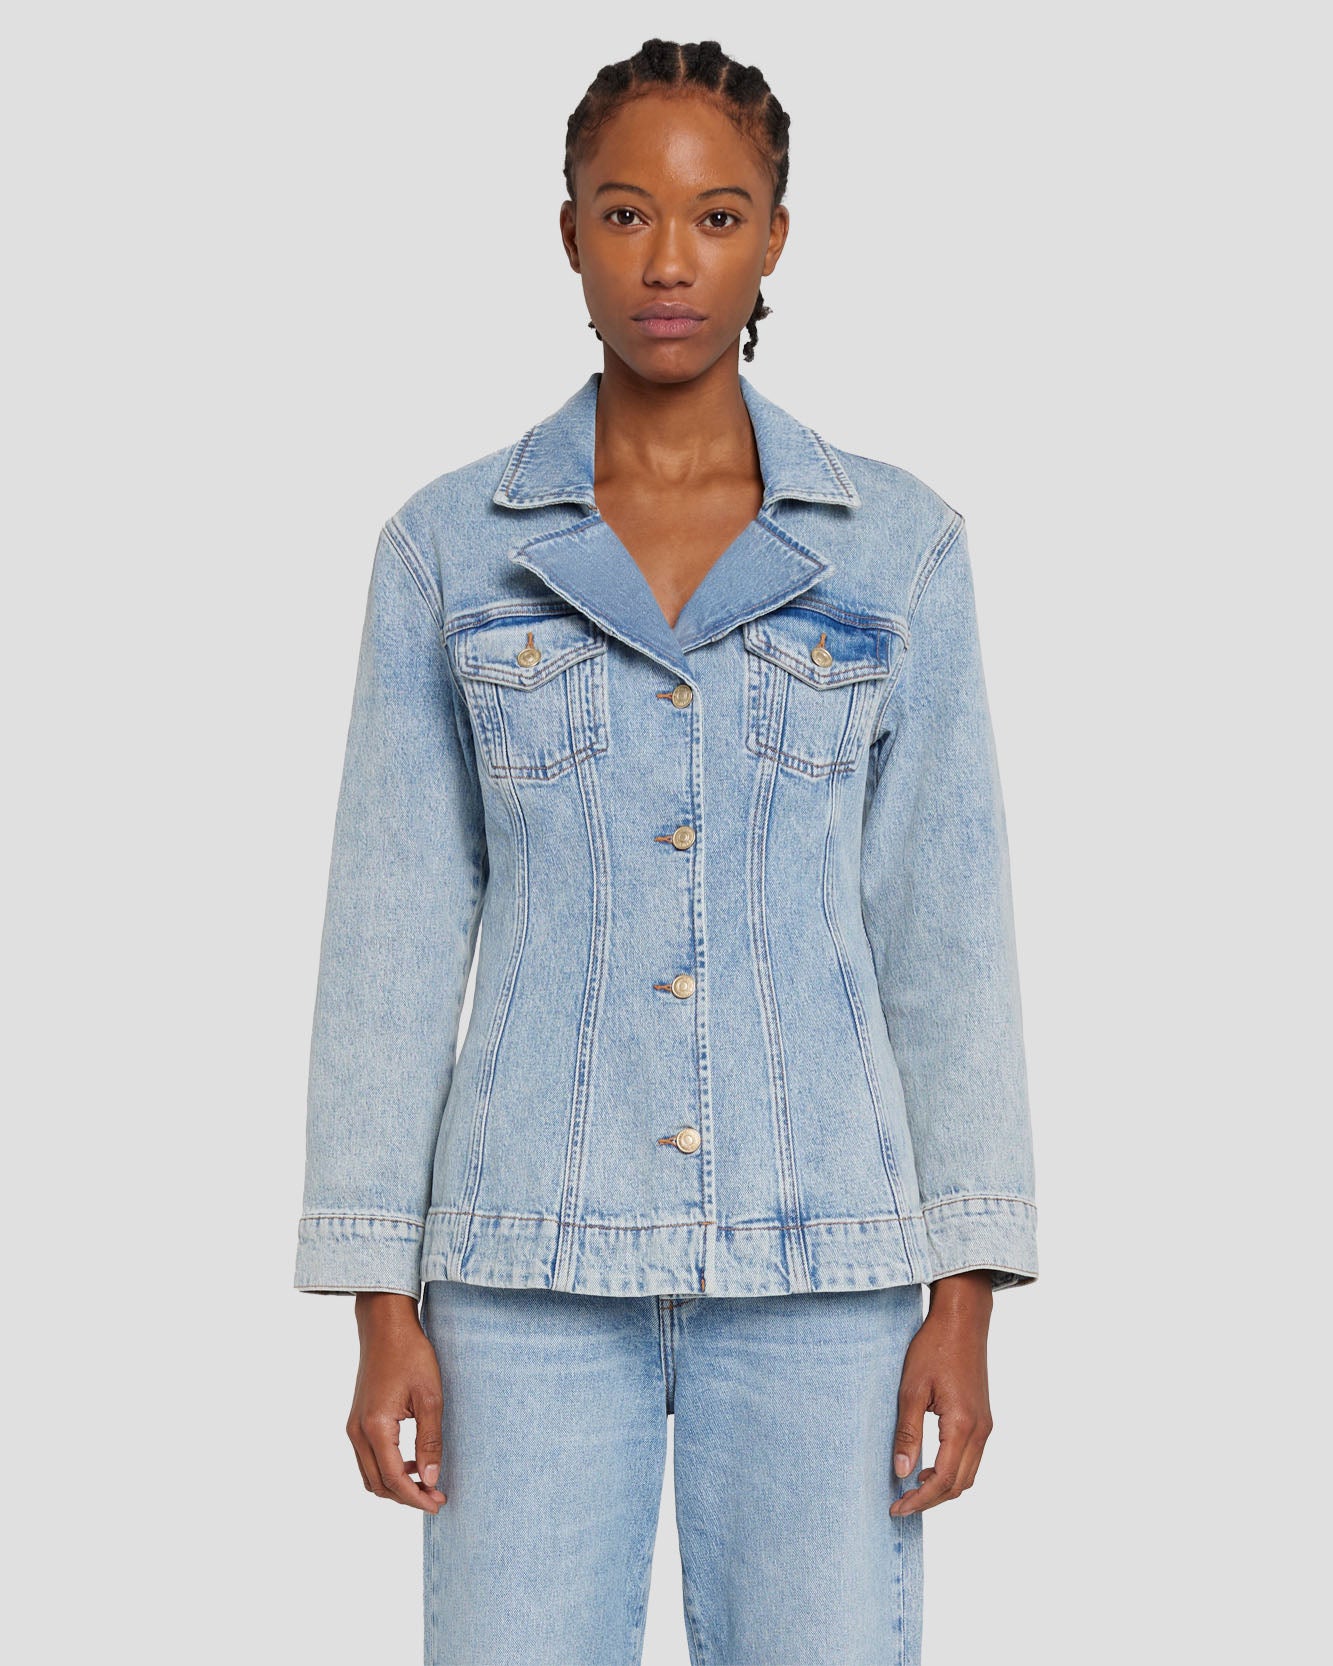 7 For All Mankind MANKIND Tailored Trucker Jacket in Ode To 7U945C10OD2